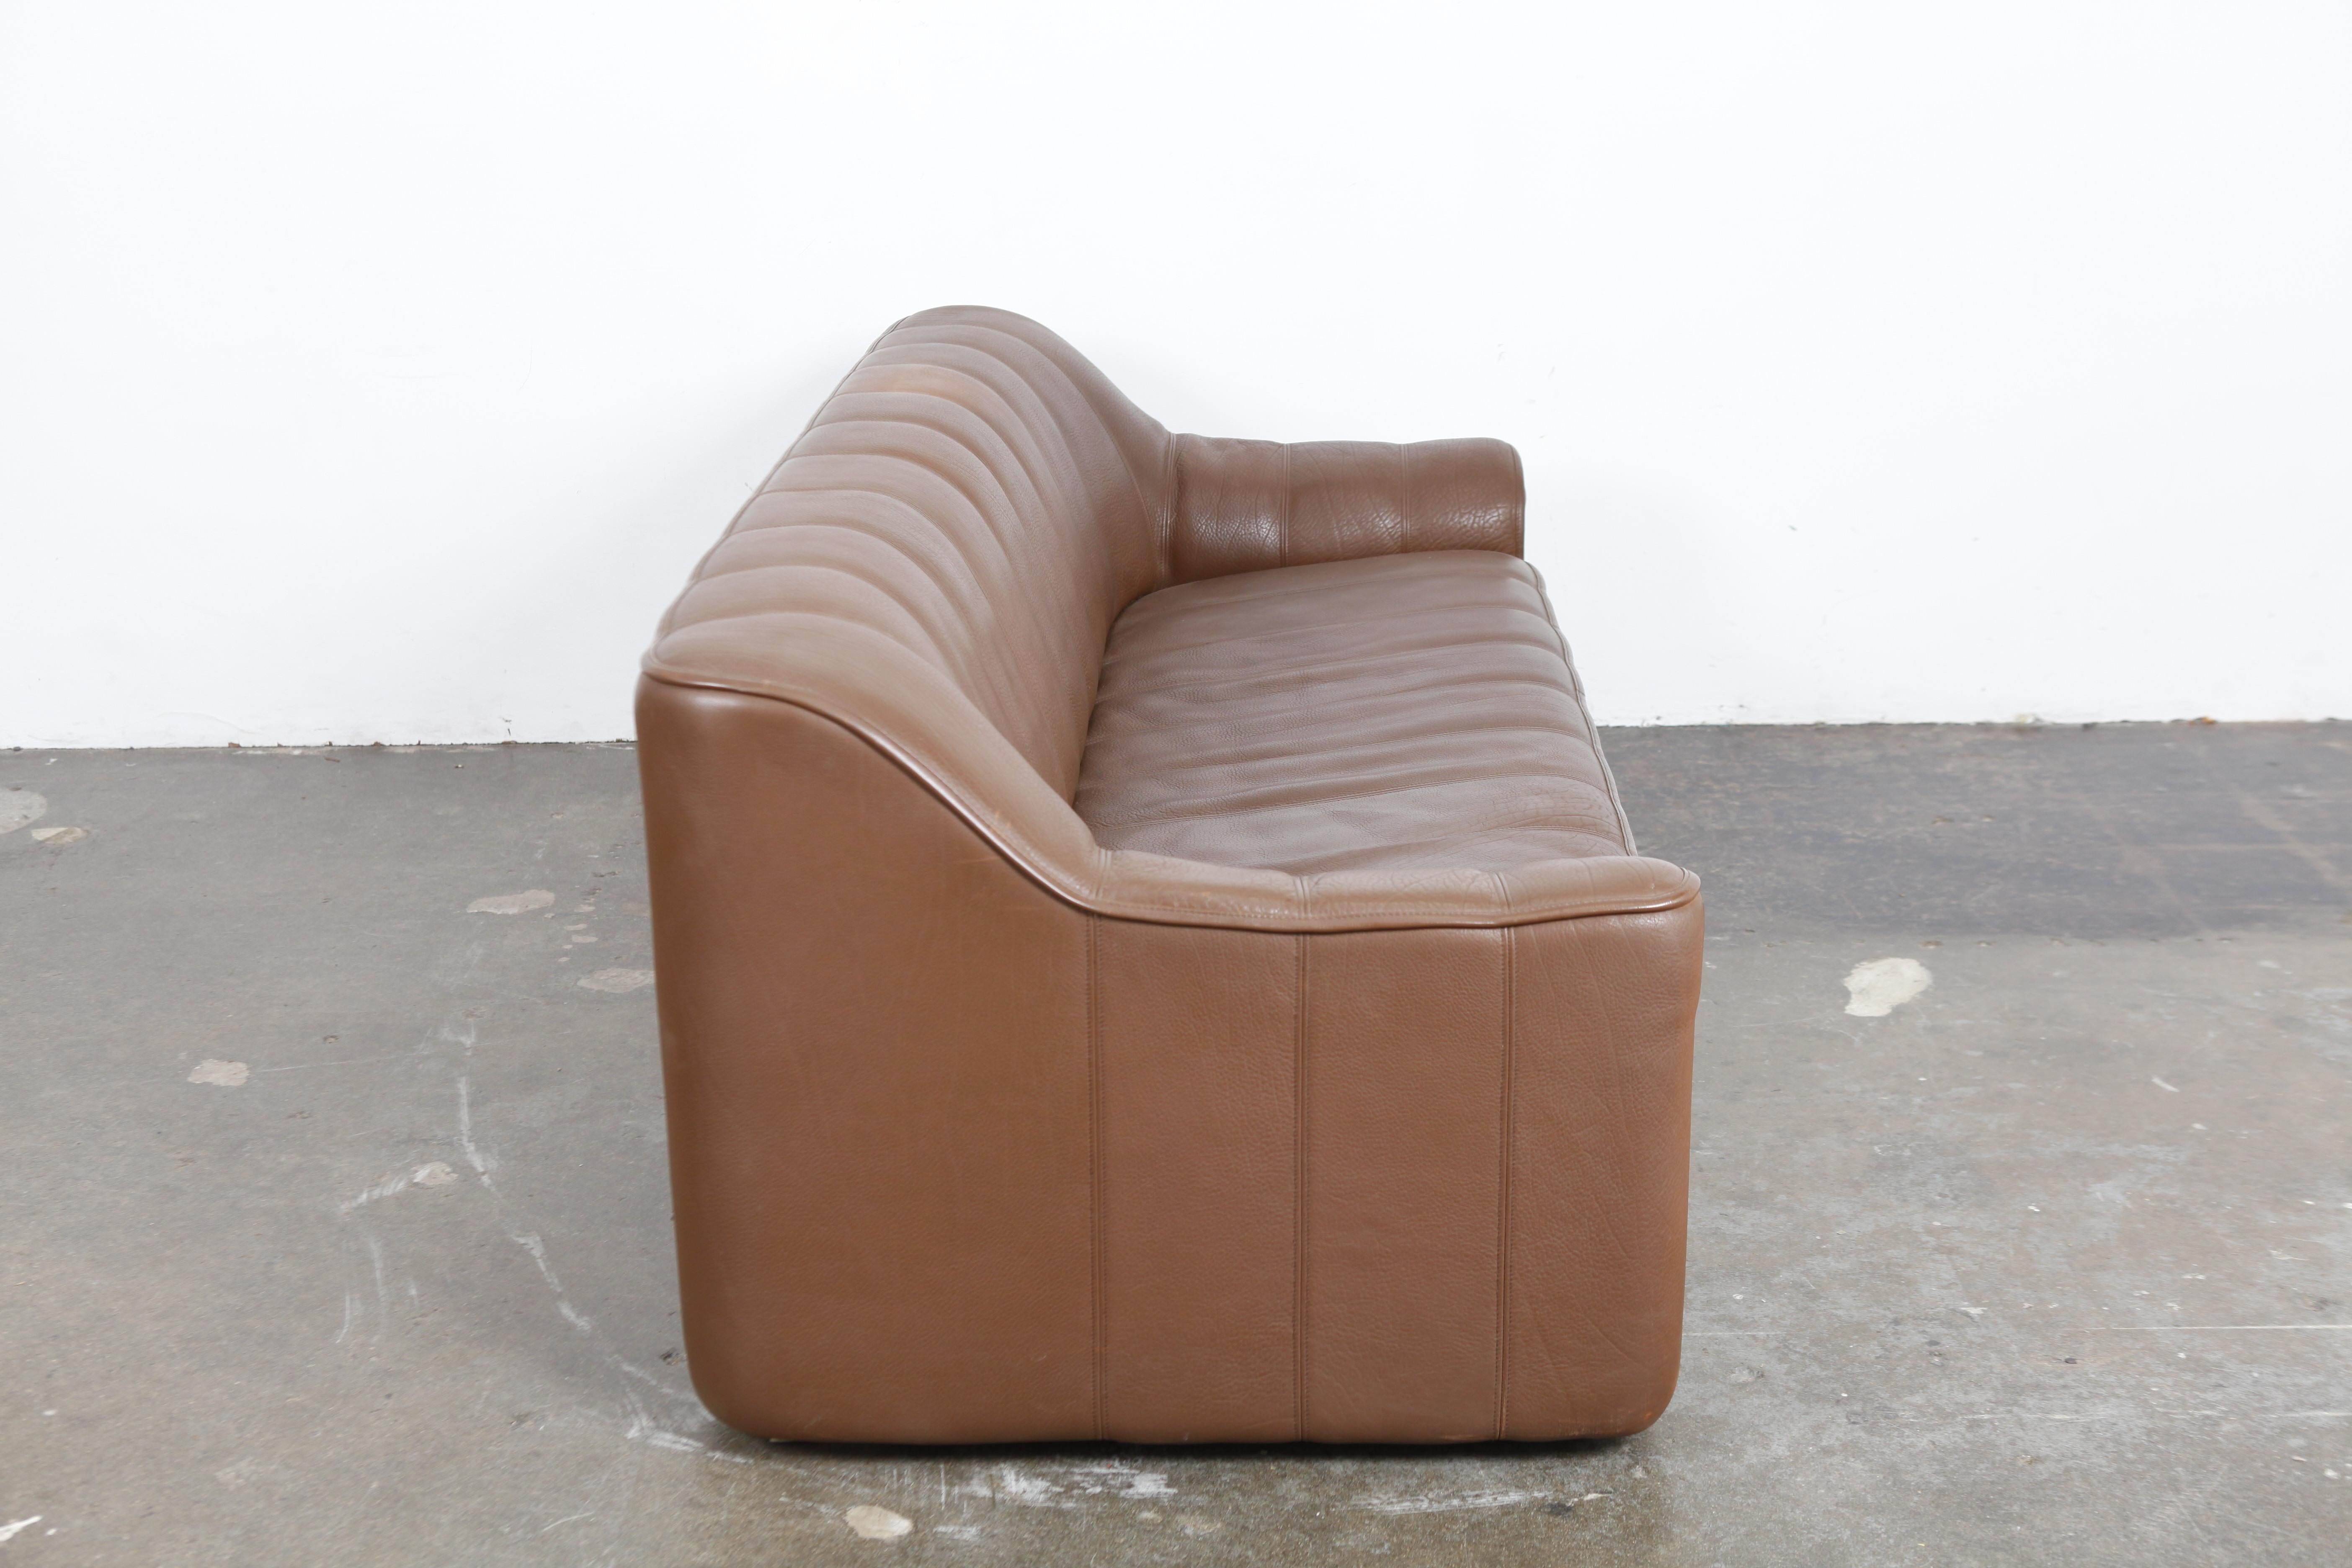 3-seat De Sede 'DS 44' sofa in original brown buffalo leather, extends to a larger seating depth, Switzerland, 1970s. No tears or damage, wear consistent with age and use.